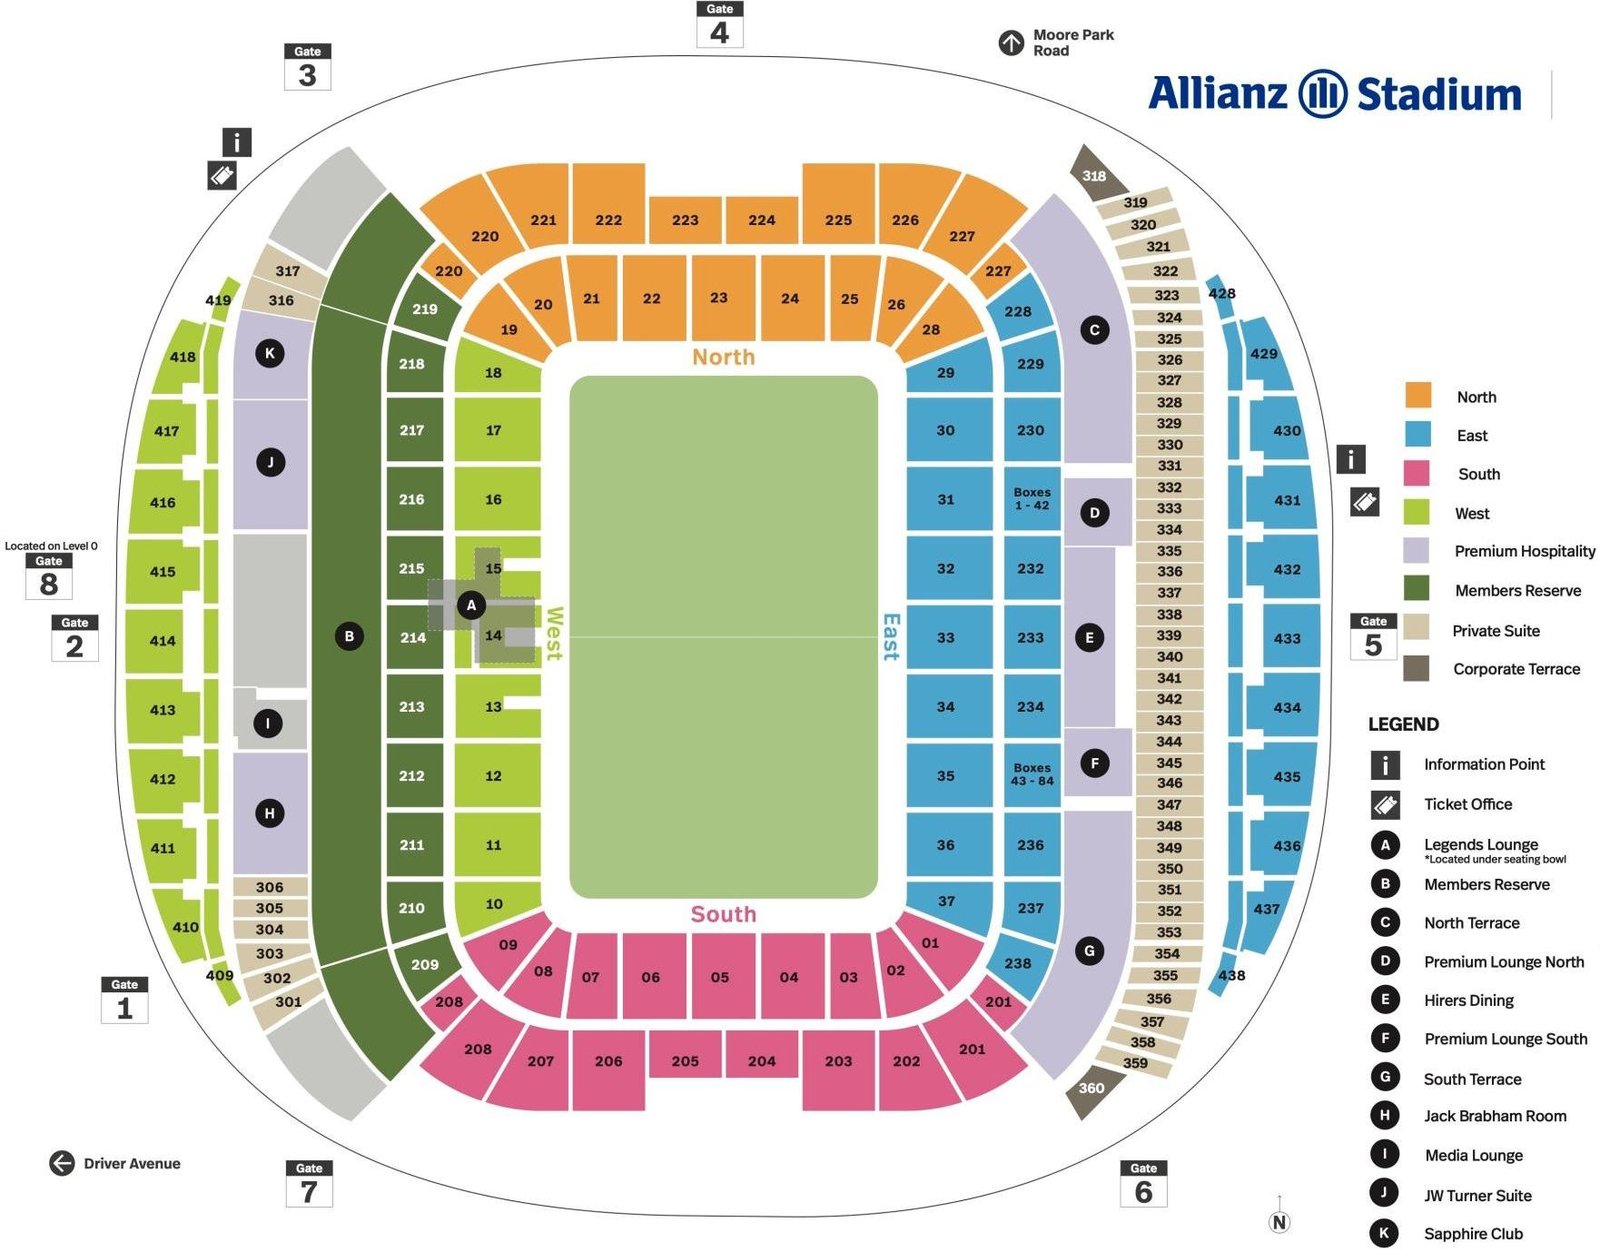 Sydney Football Stadium Seating Plan with Rows and Stands and Seat Numbers